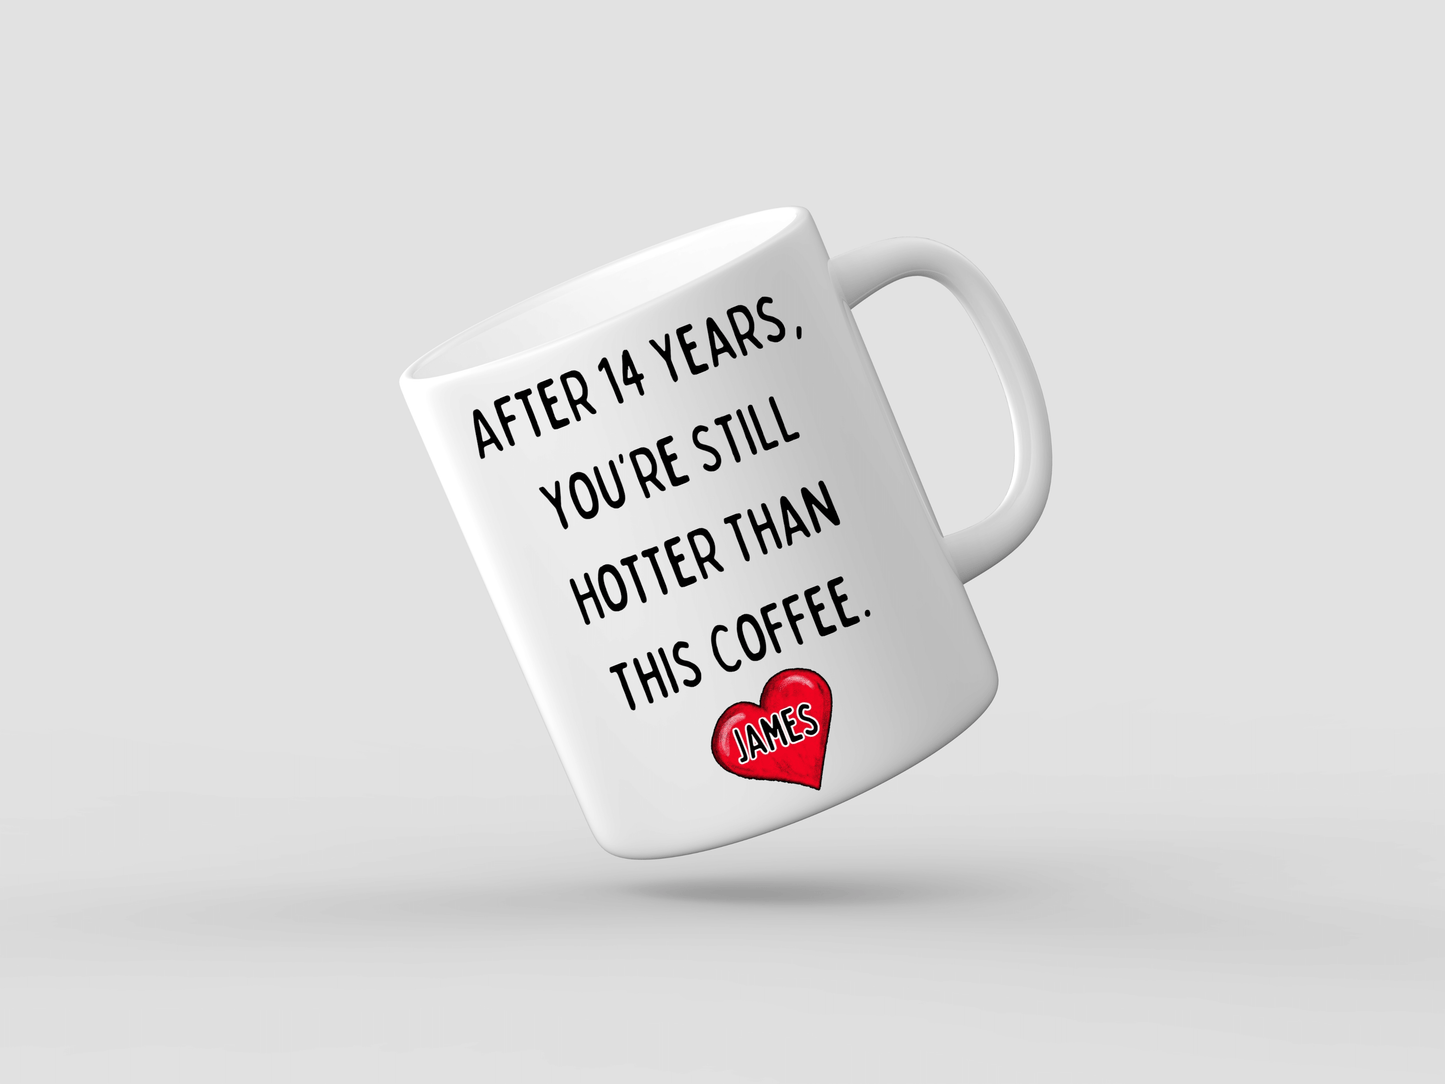 Personalized Funny Coffee Mug | Still Hotter Than Coffee | Custom Anniversary Gift | Heart Emoji | Unique Ceramic Cup with Name | Drinkware